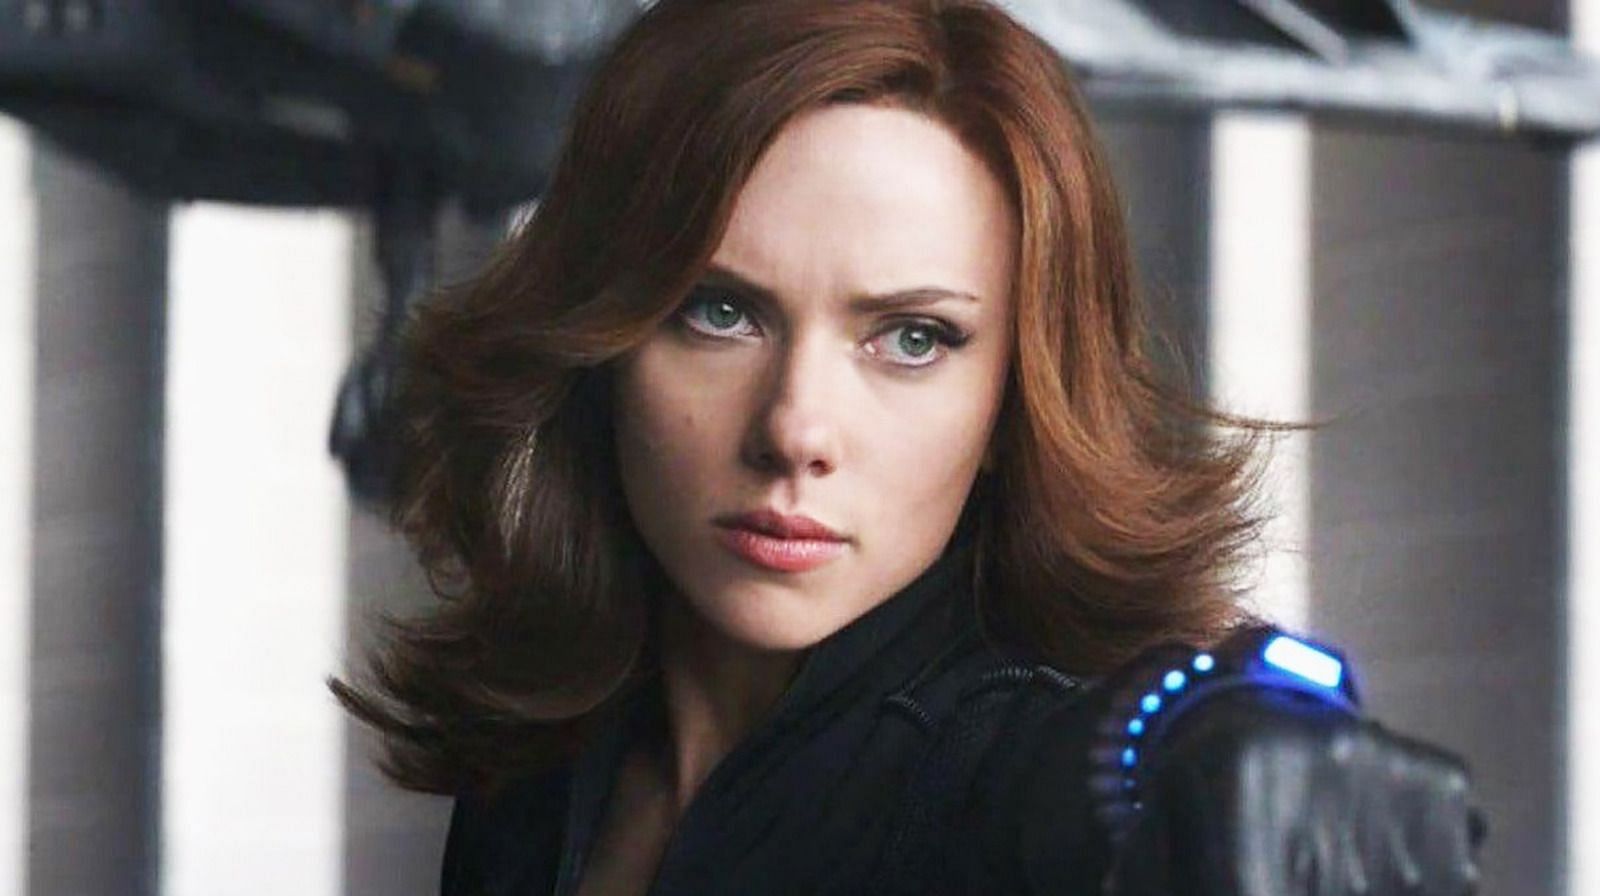 Natasha Romanoff&#039;s legacy in the Marvel Cinematic Universe will live on through the fans who have come to love and admire her (Image via Marvel Studios)